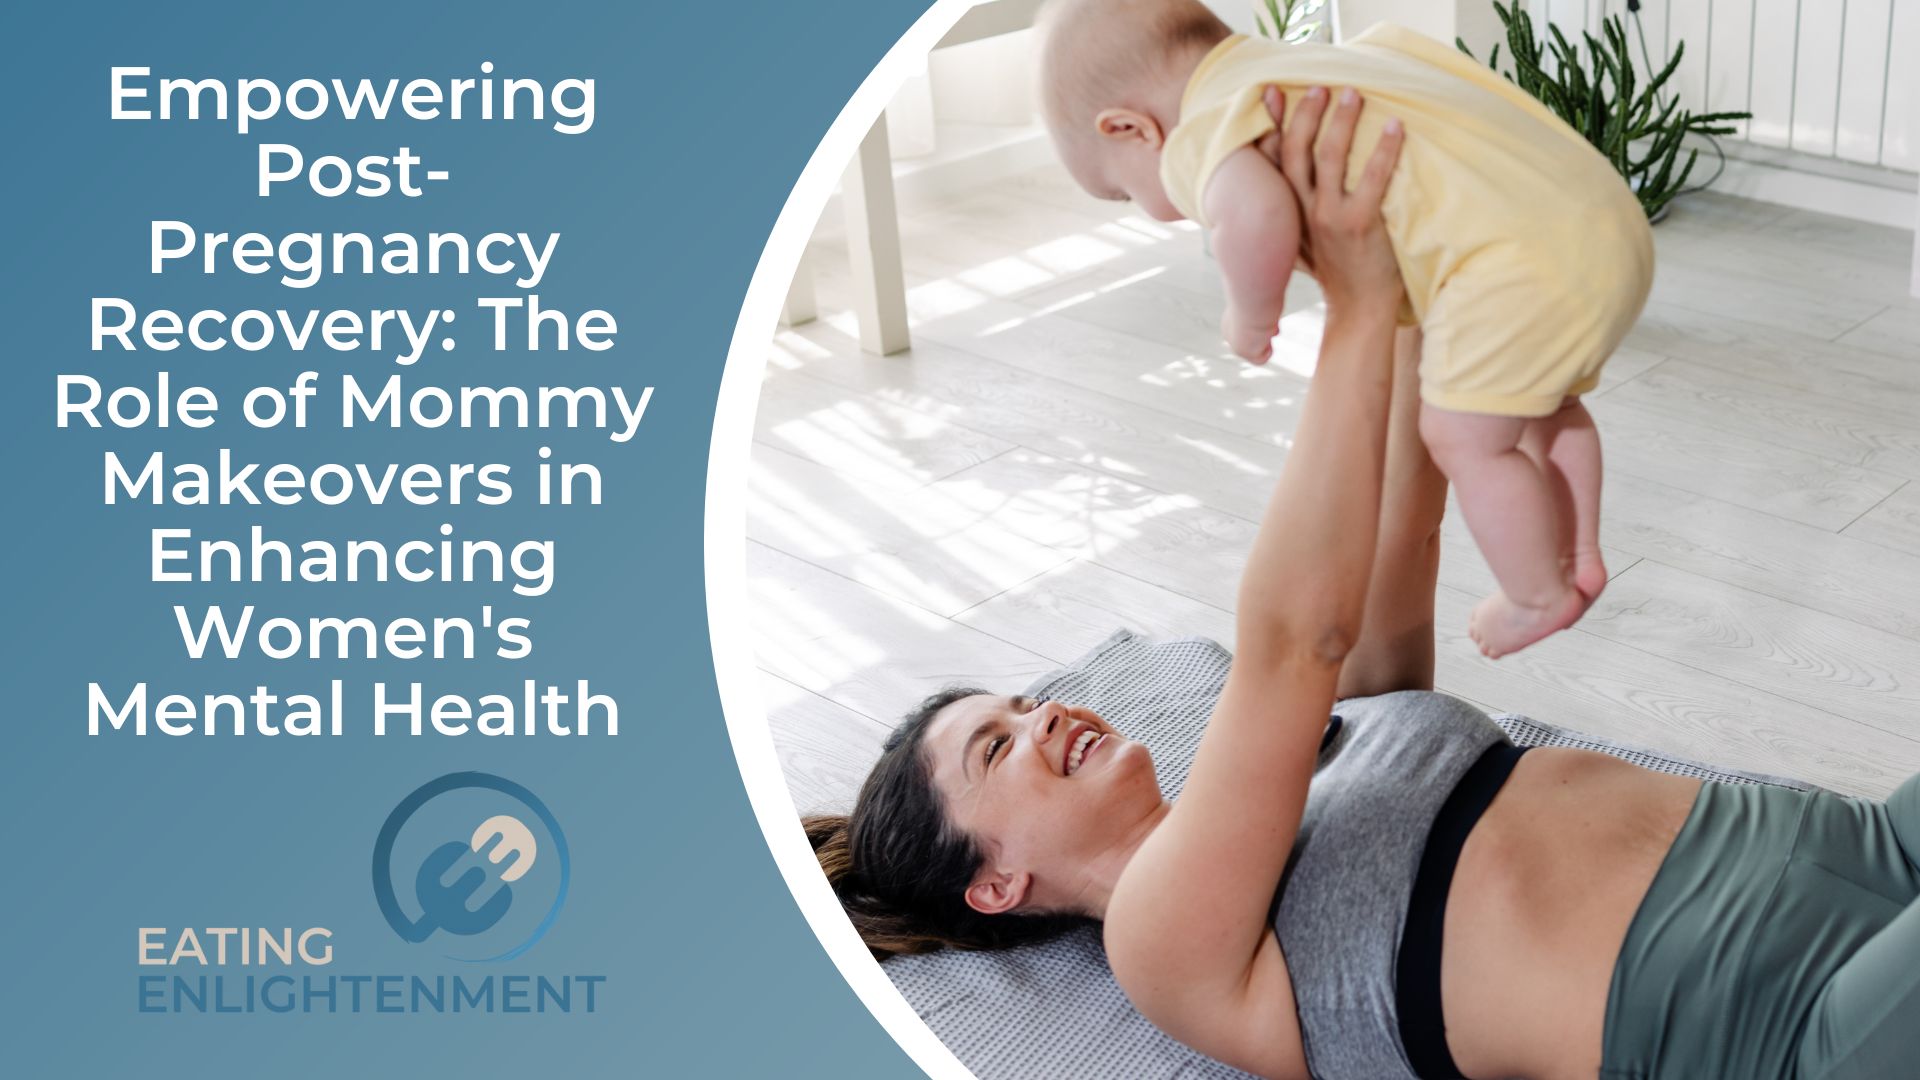 Empowering Post-Pregnancy Recovery The Role of Mommy Makeovers in Enhancing Women's Mental Health